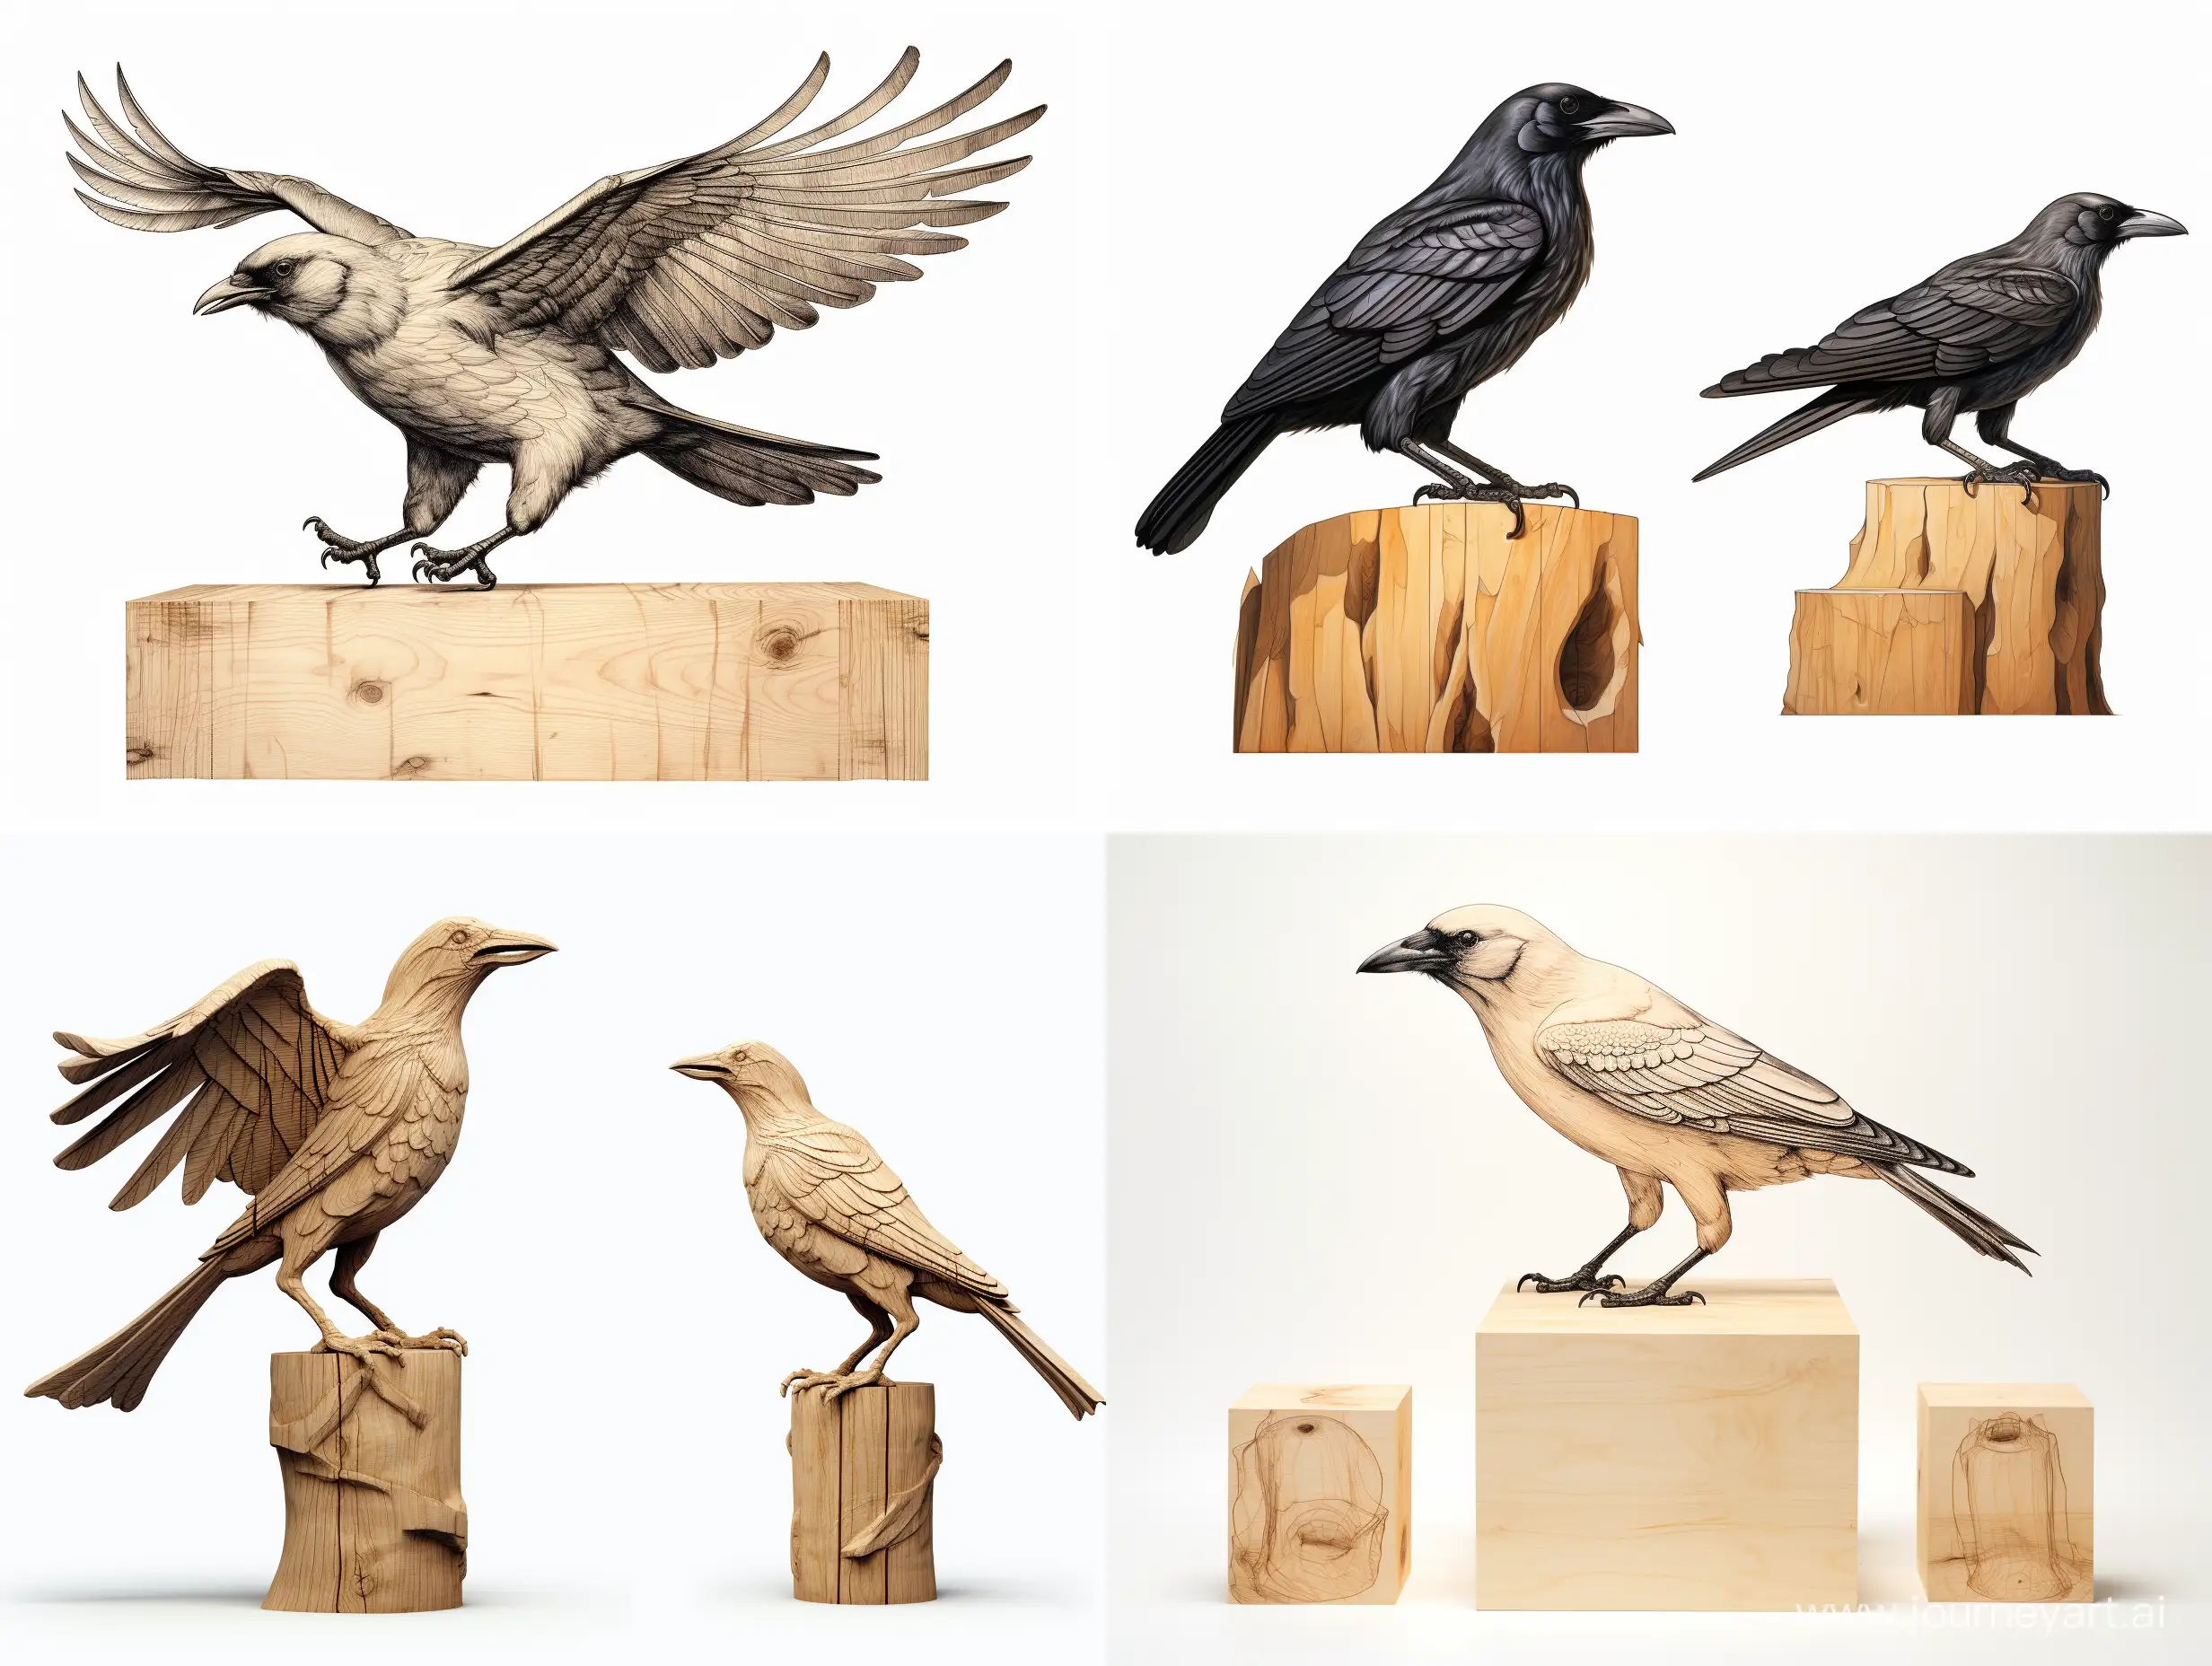 Realistic-LifeSize-Crow-Wood-Carving-in-Dynamic-Flight-Pose